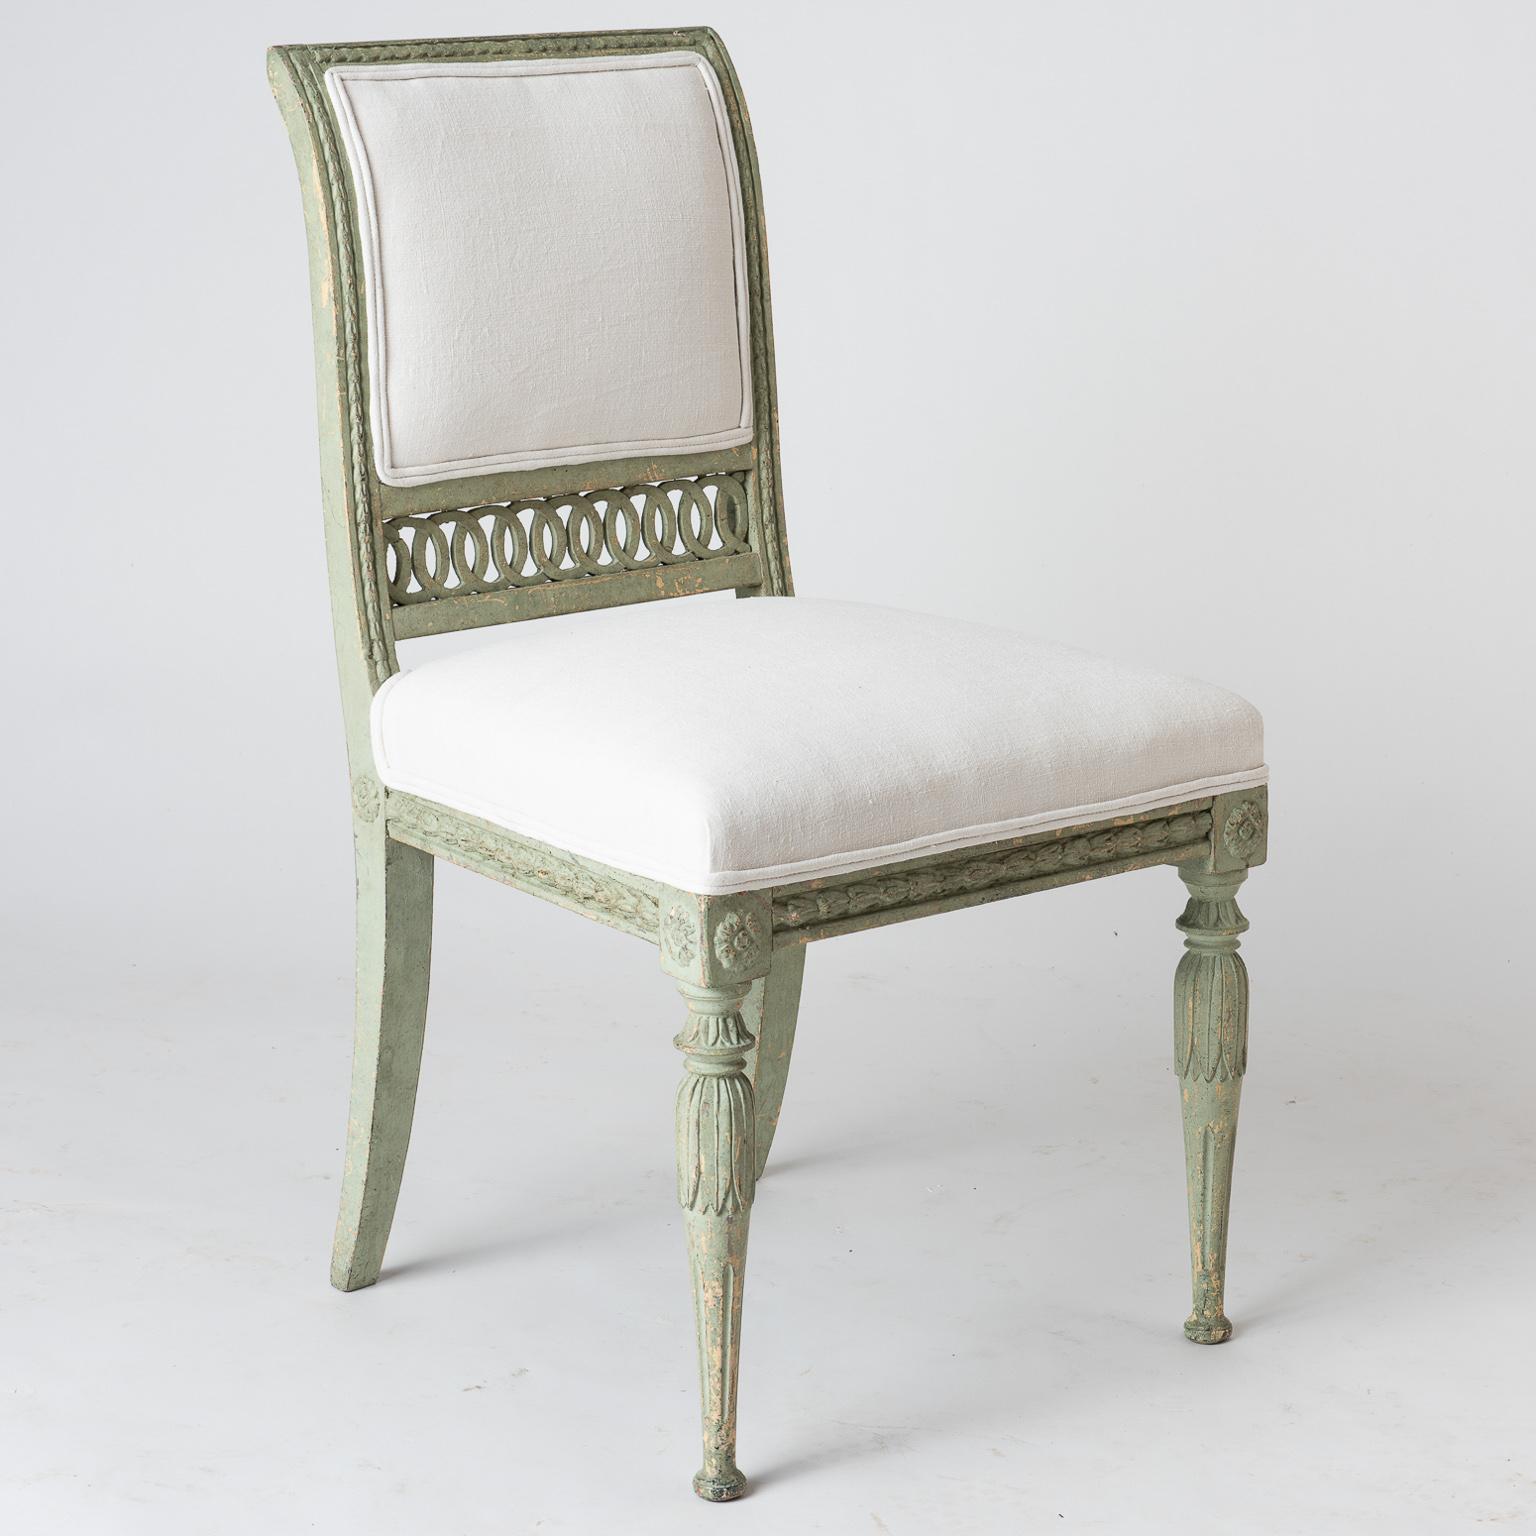 Pair of Swedish Gustavian Period Side Chairs in Old Green Paint, circa 1800 For Sale 4